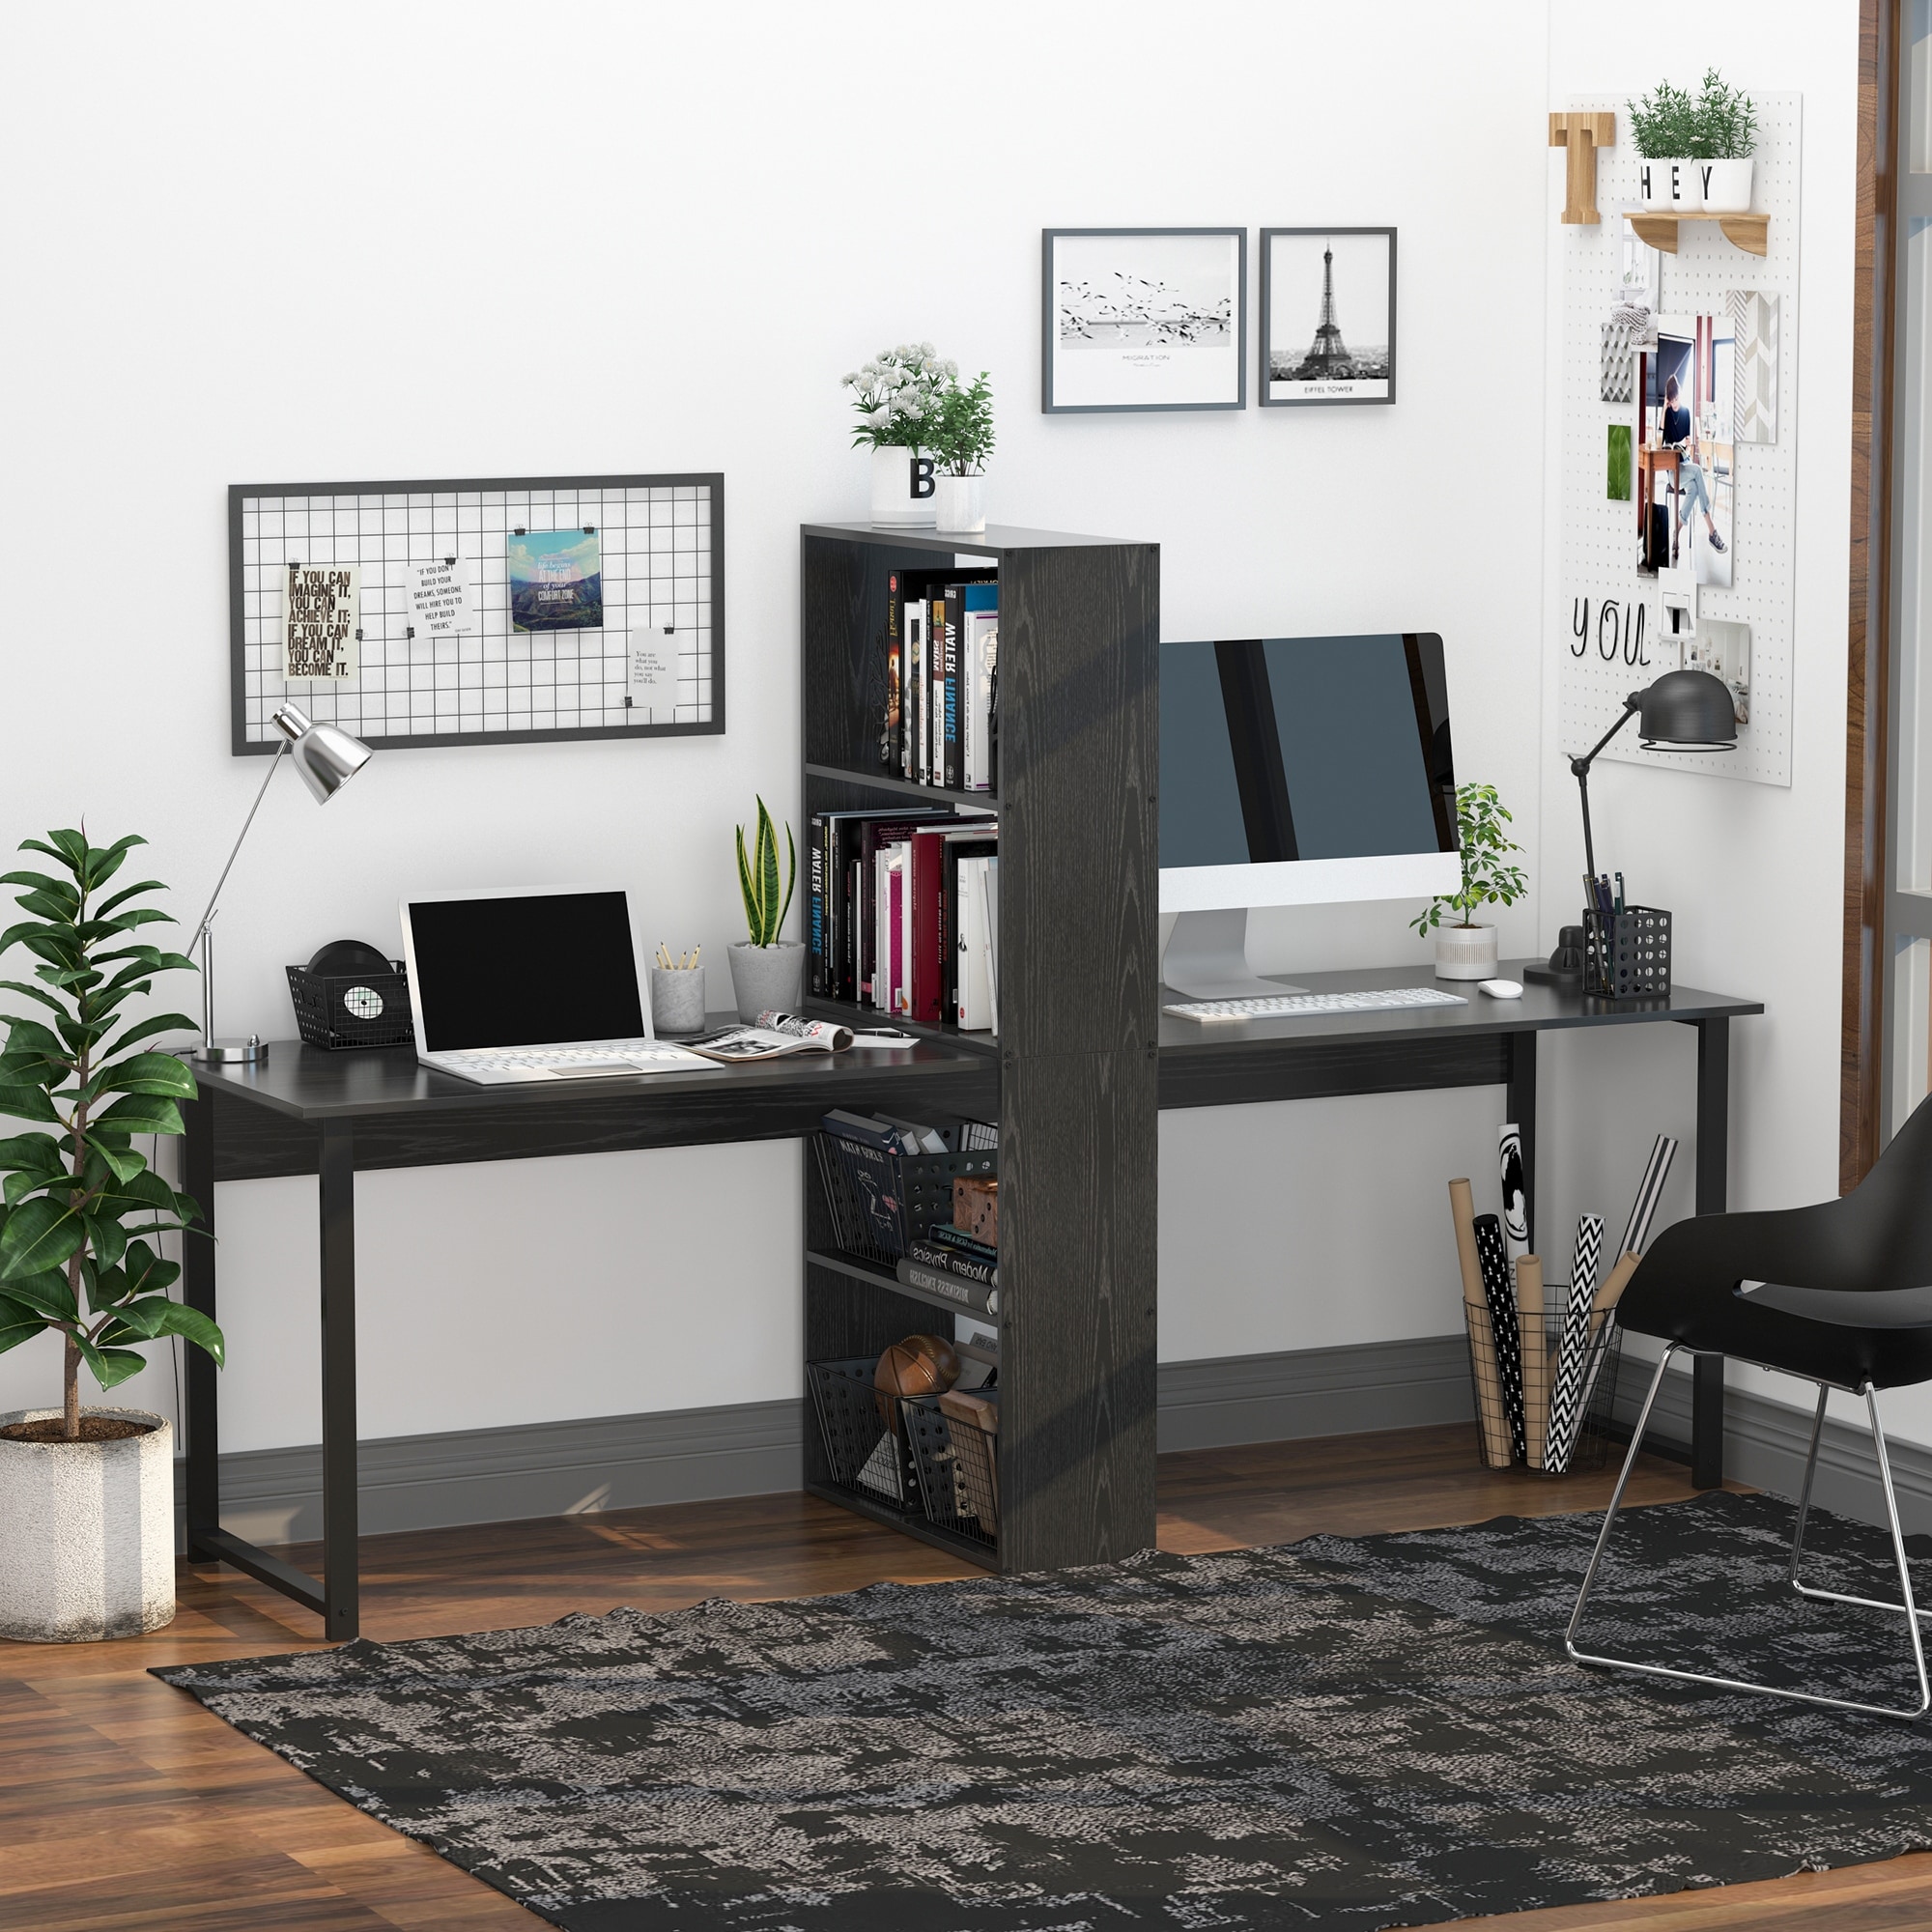 Tribesigns 78.7 inches Extra Long Computer Desk 2 Person, Extra Wide Double  Office lndustrial Writing Workstation with Adjustable Foot Pads for Home